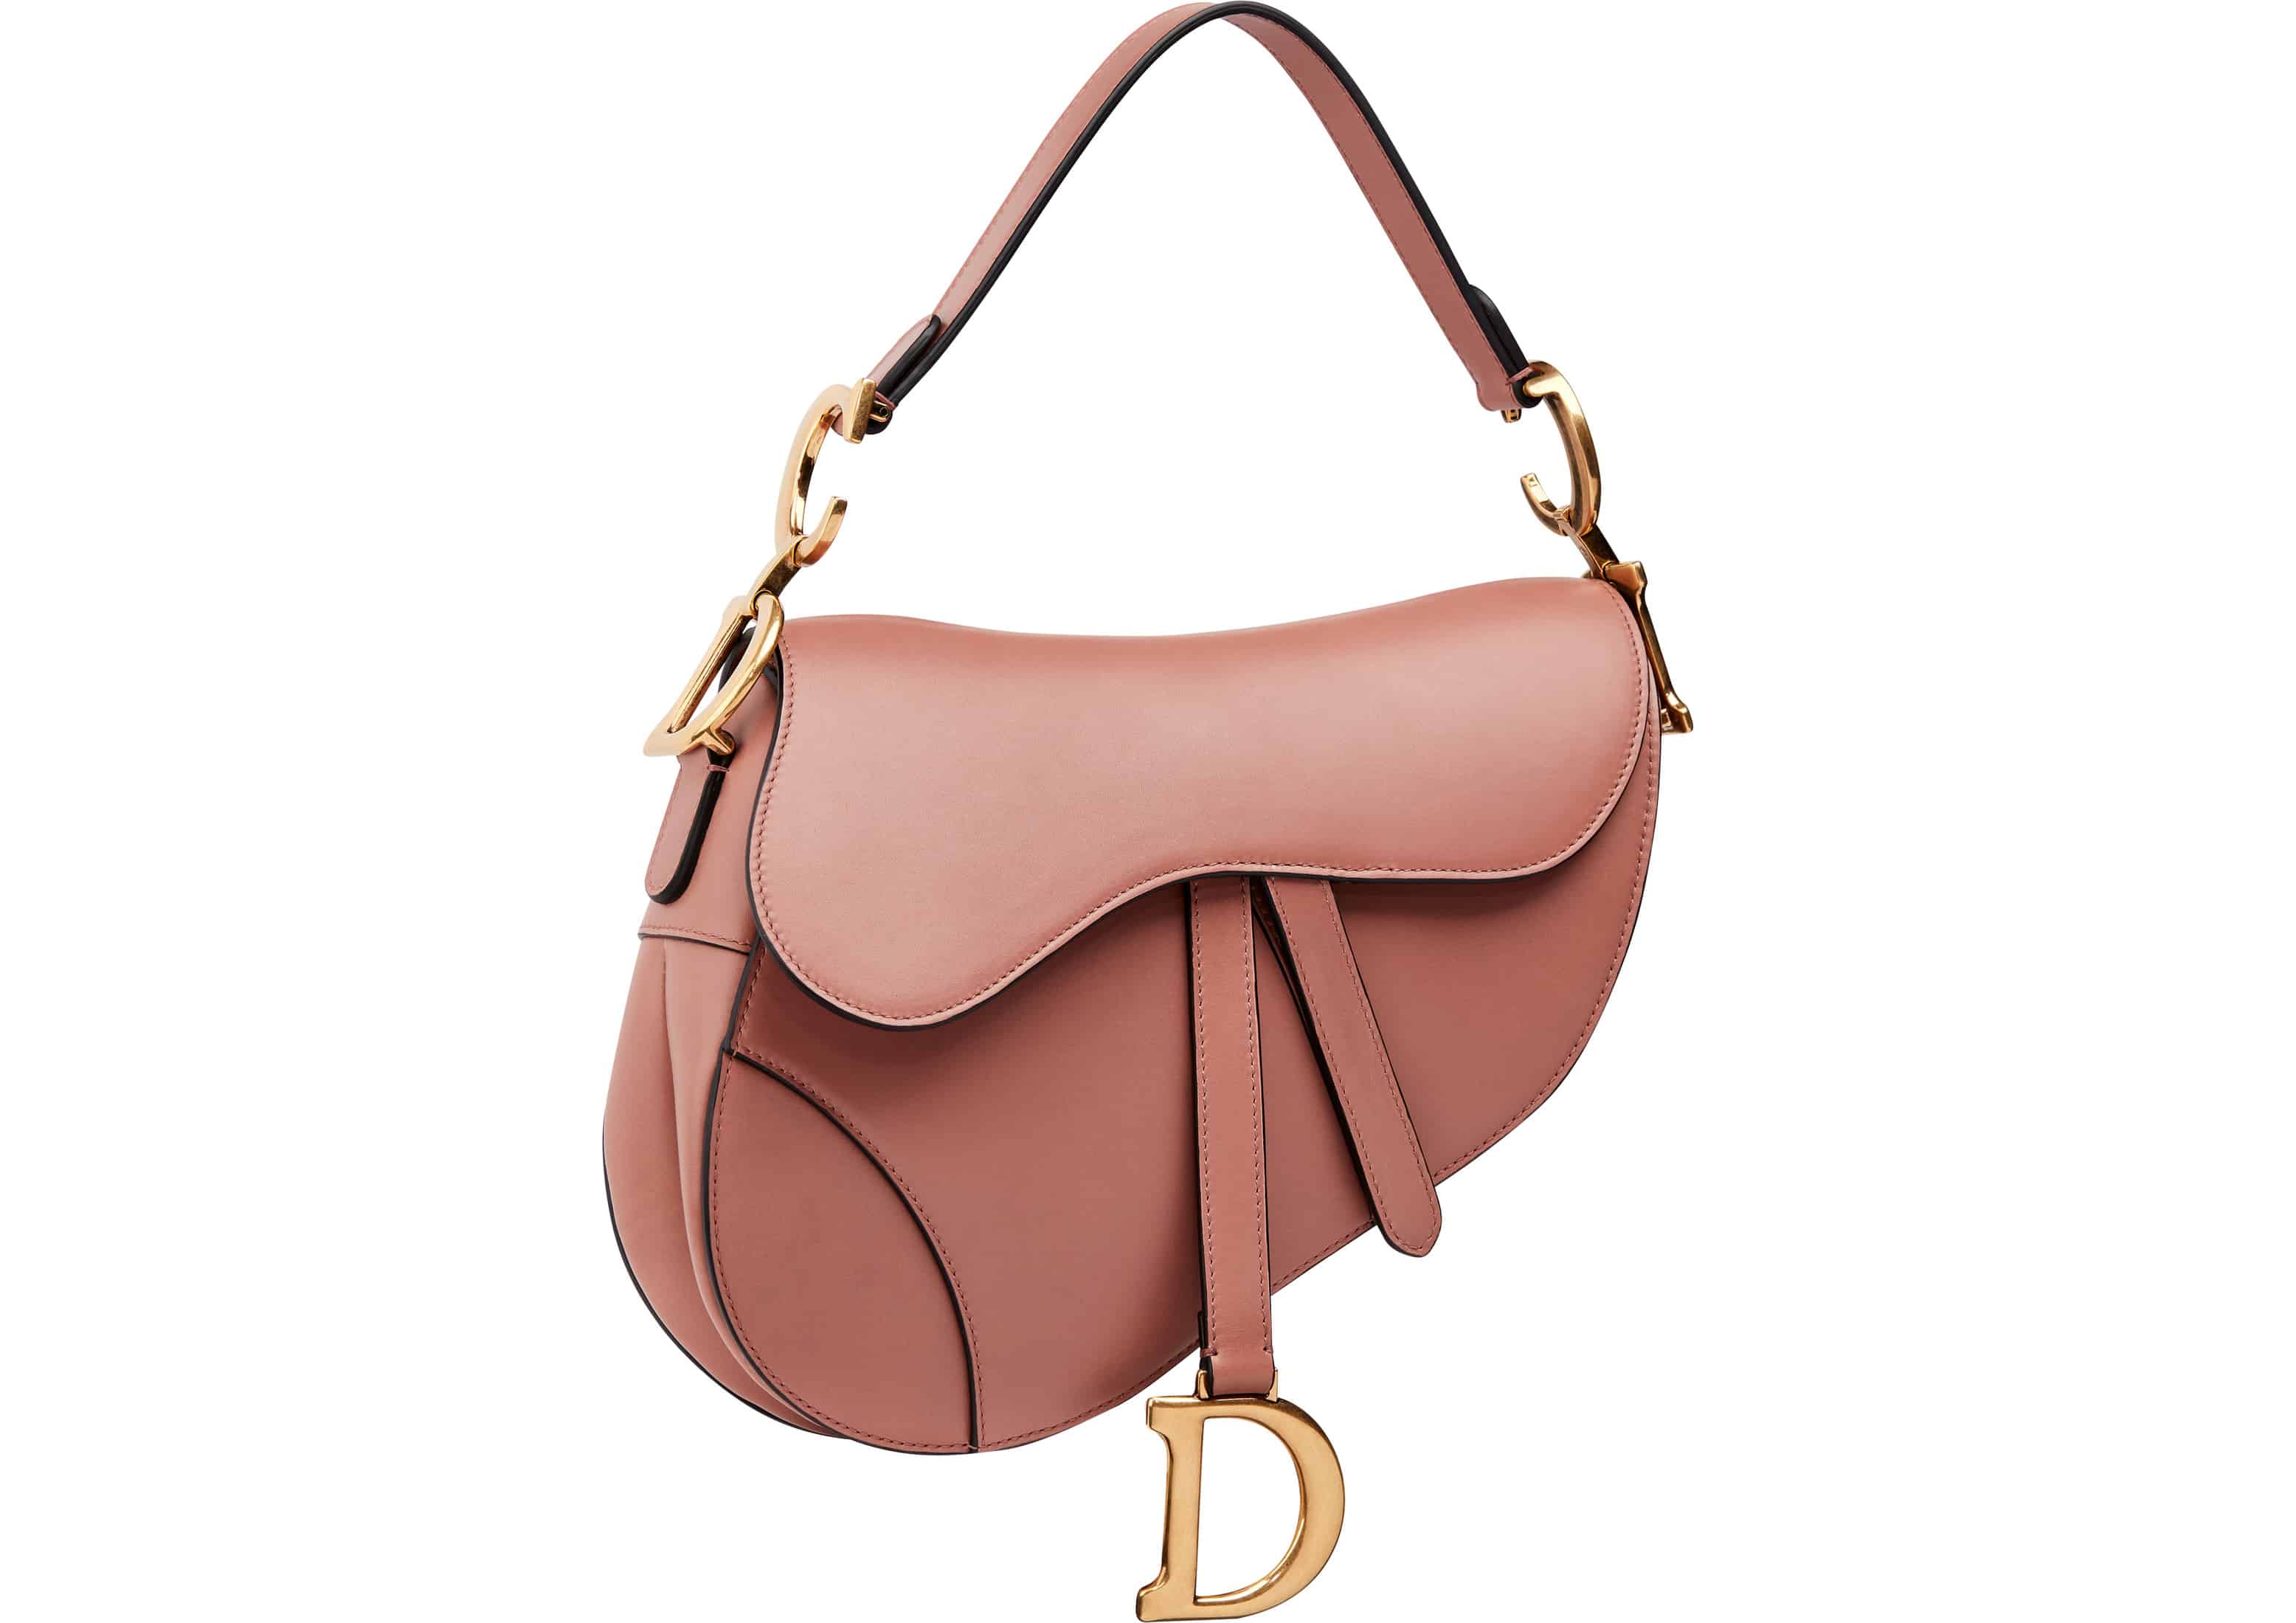 The New Dior Saddle Bag Is Finally in 